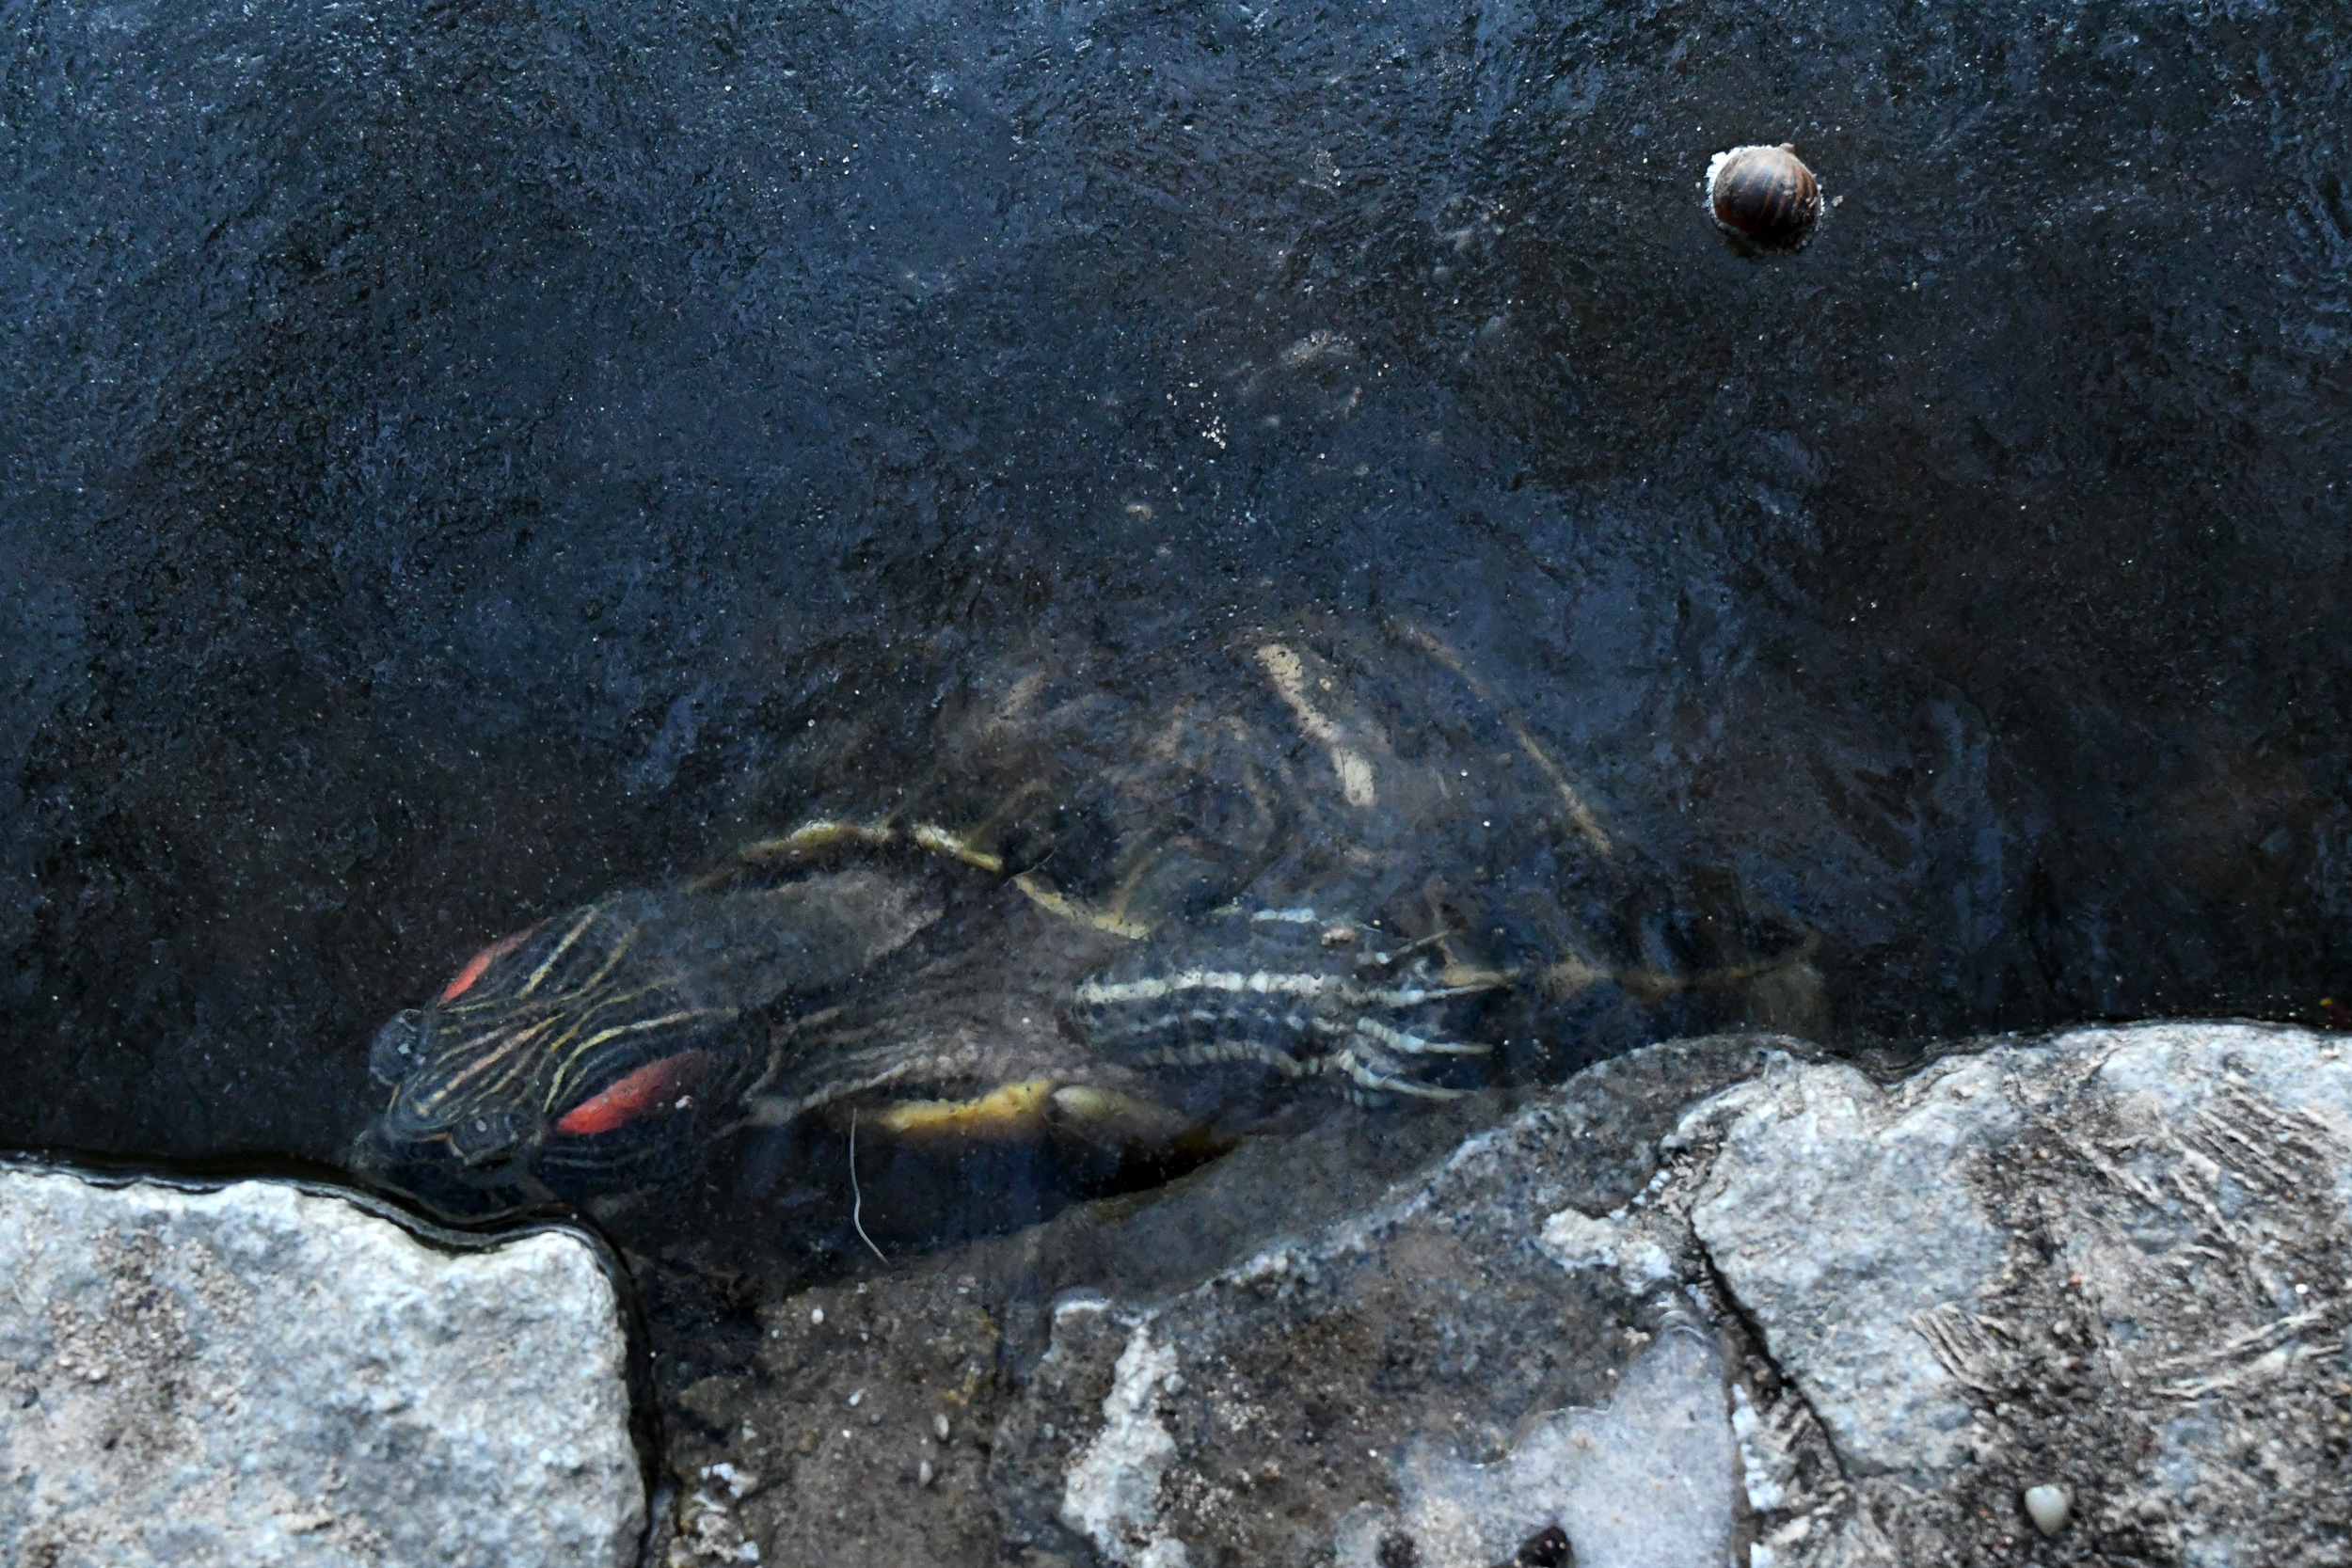 Painted turtle under ice, Lullwater, Prospect Park